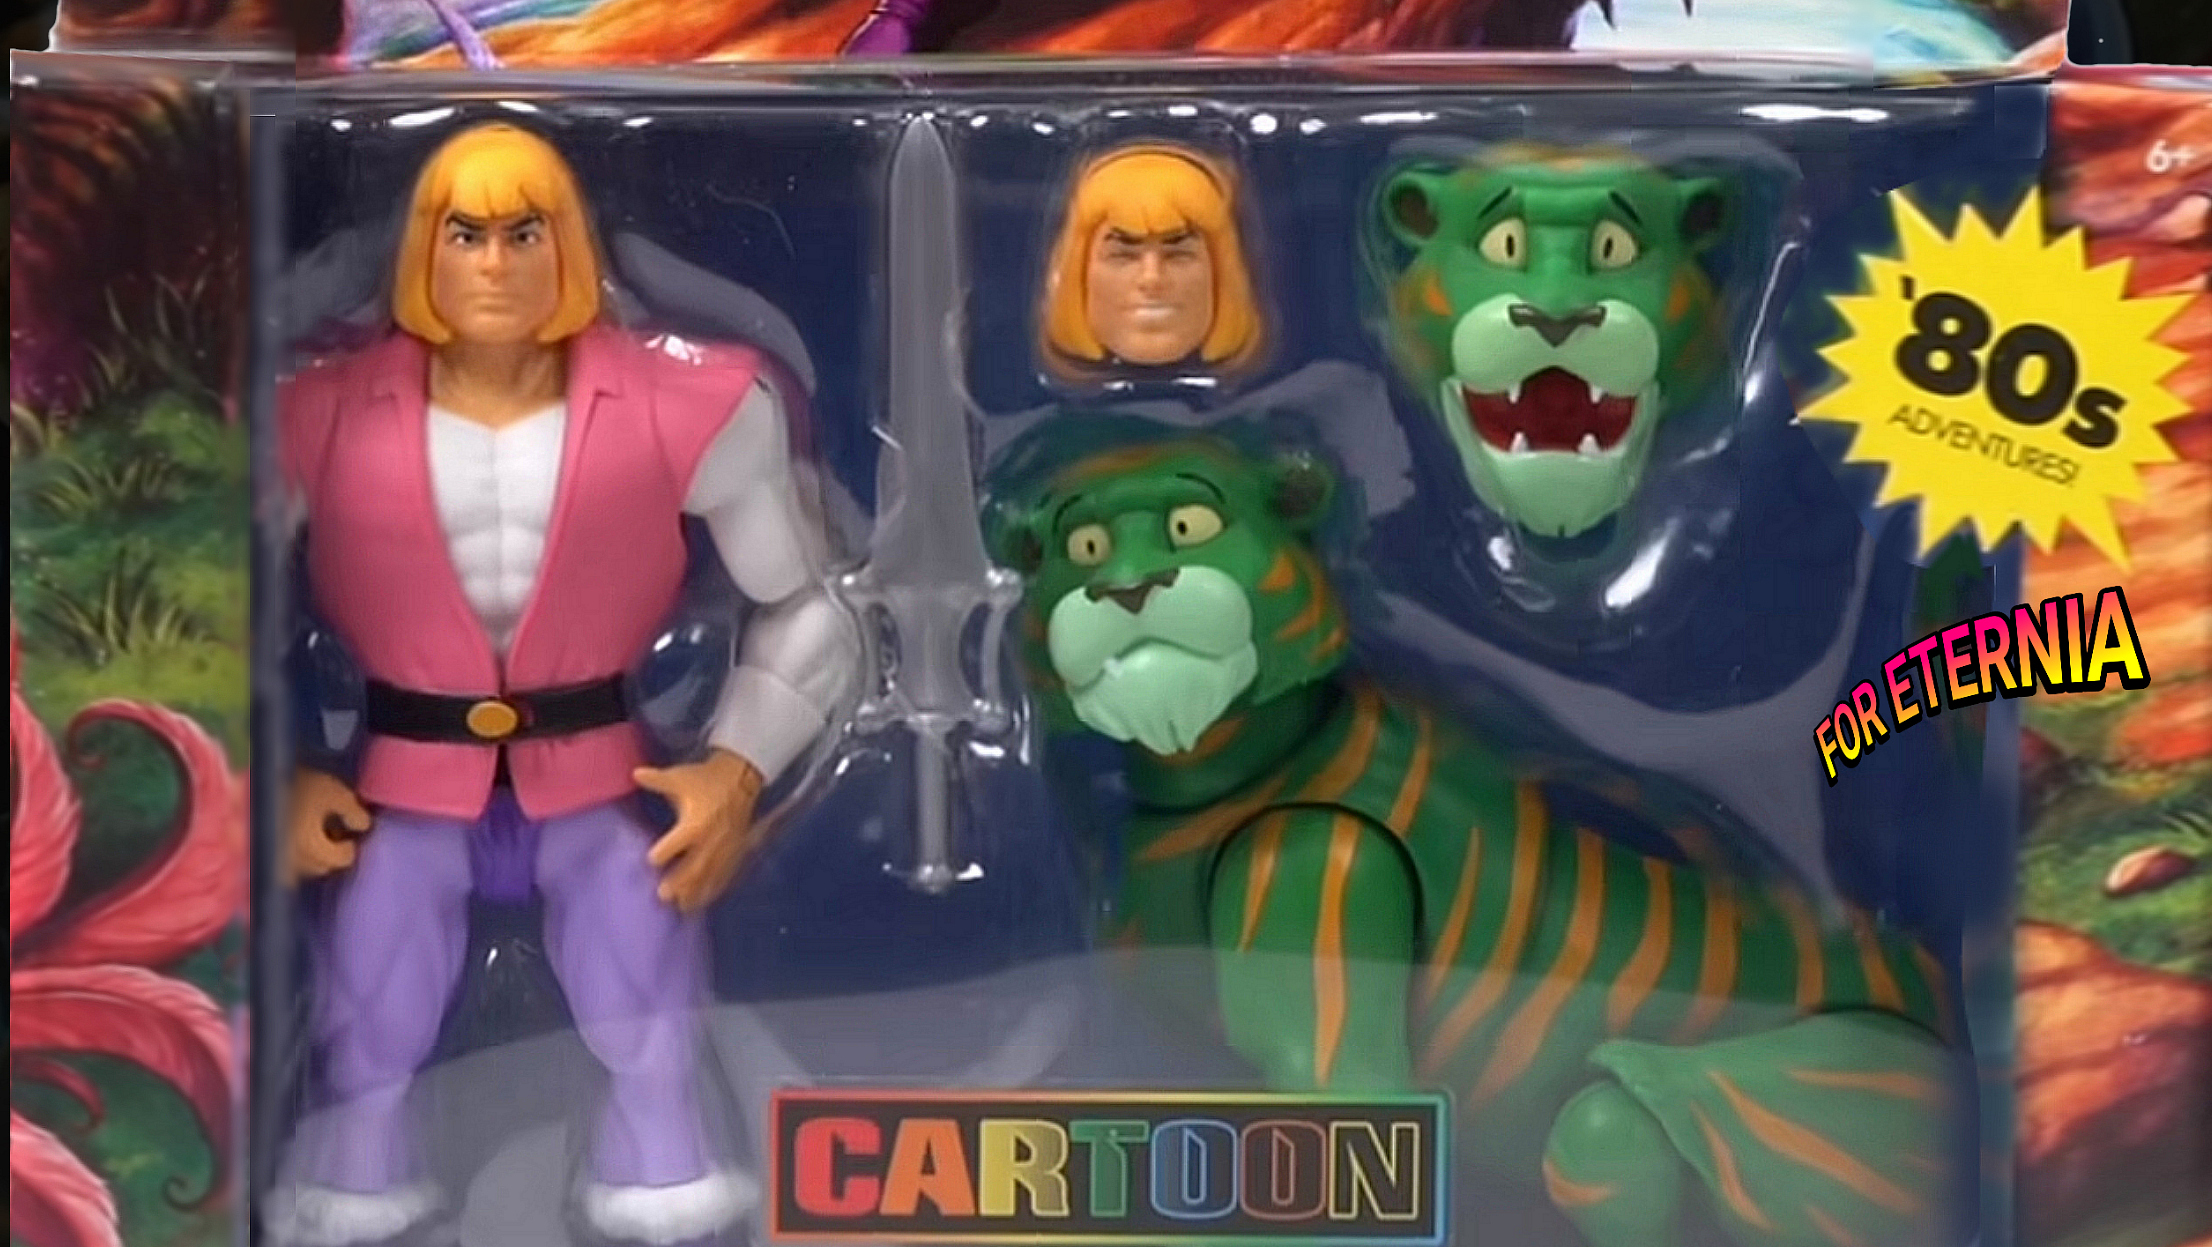 Full Packaging and Artwork reveal for the new Masters of the Universe: Origins ”Cartoon Collection” Prince Adam and Cringer 2-pack